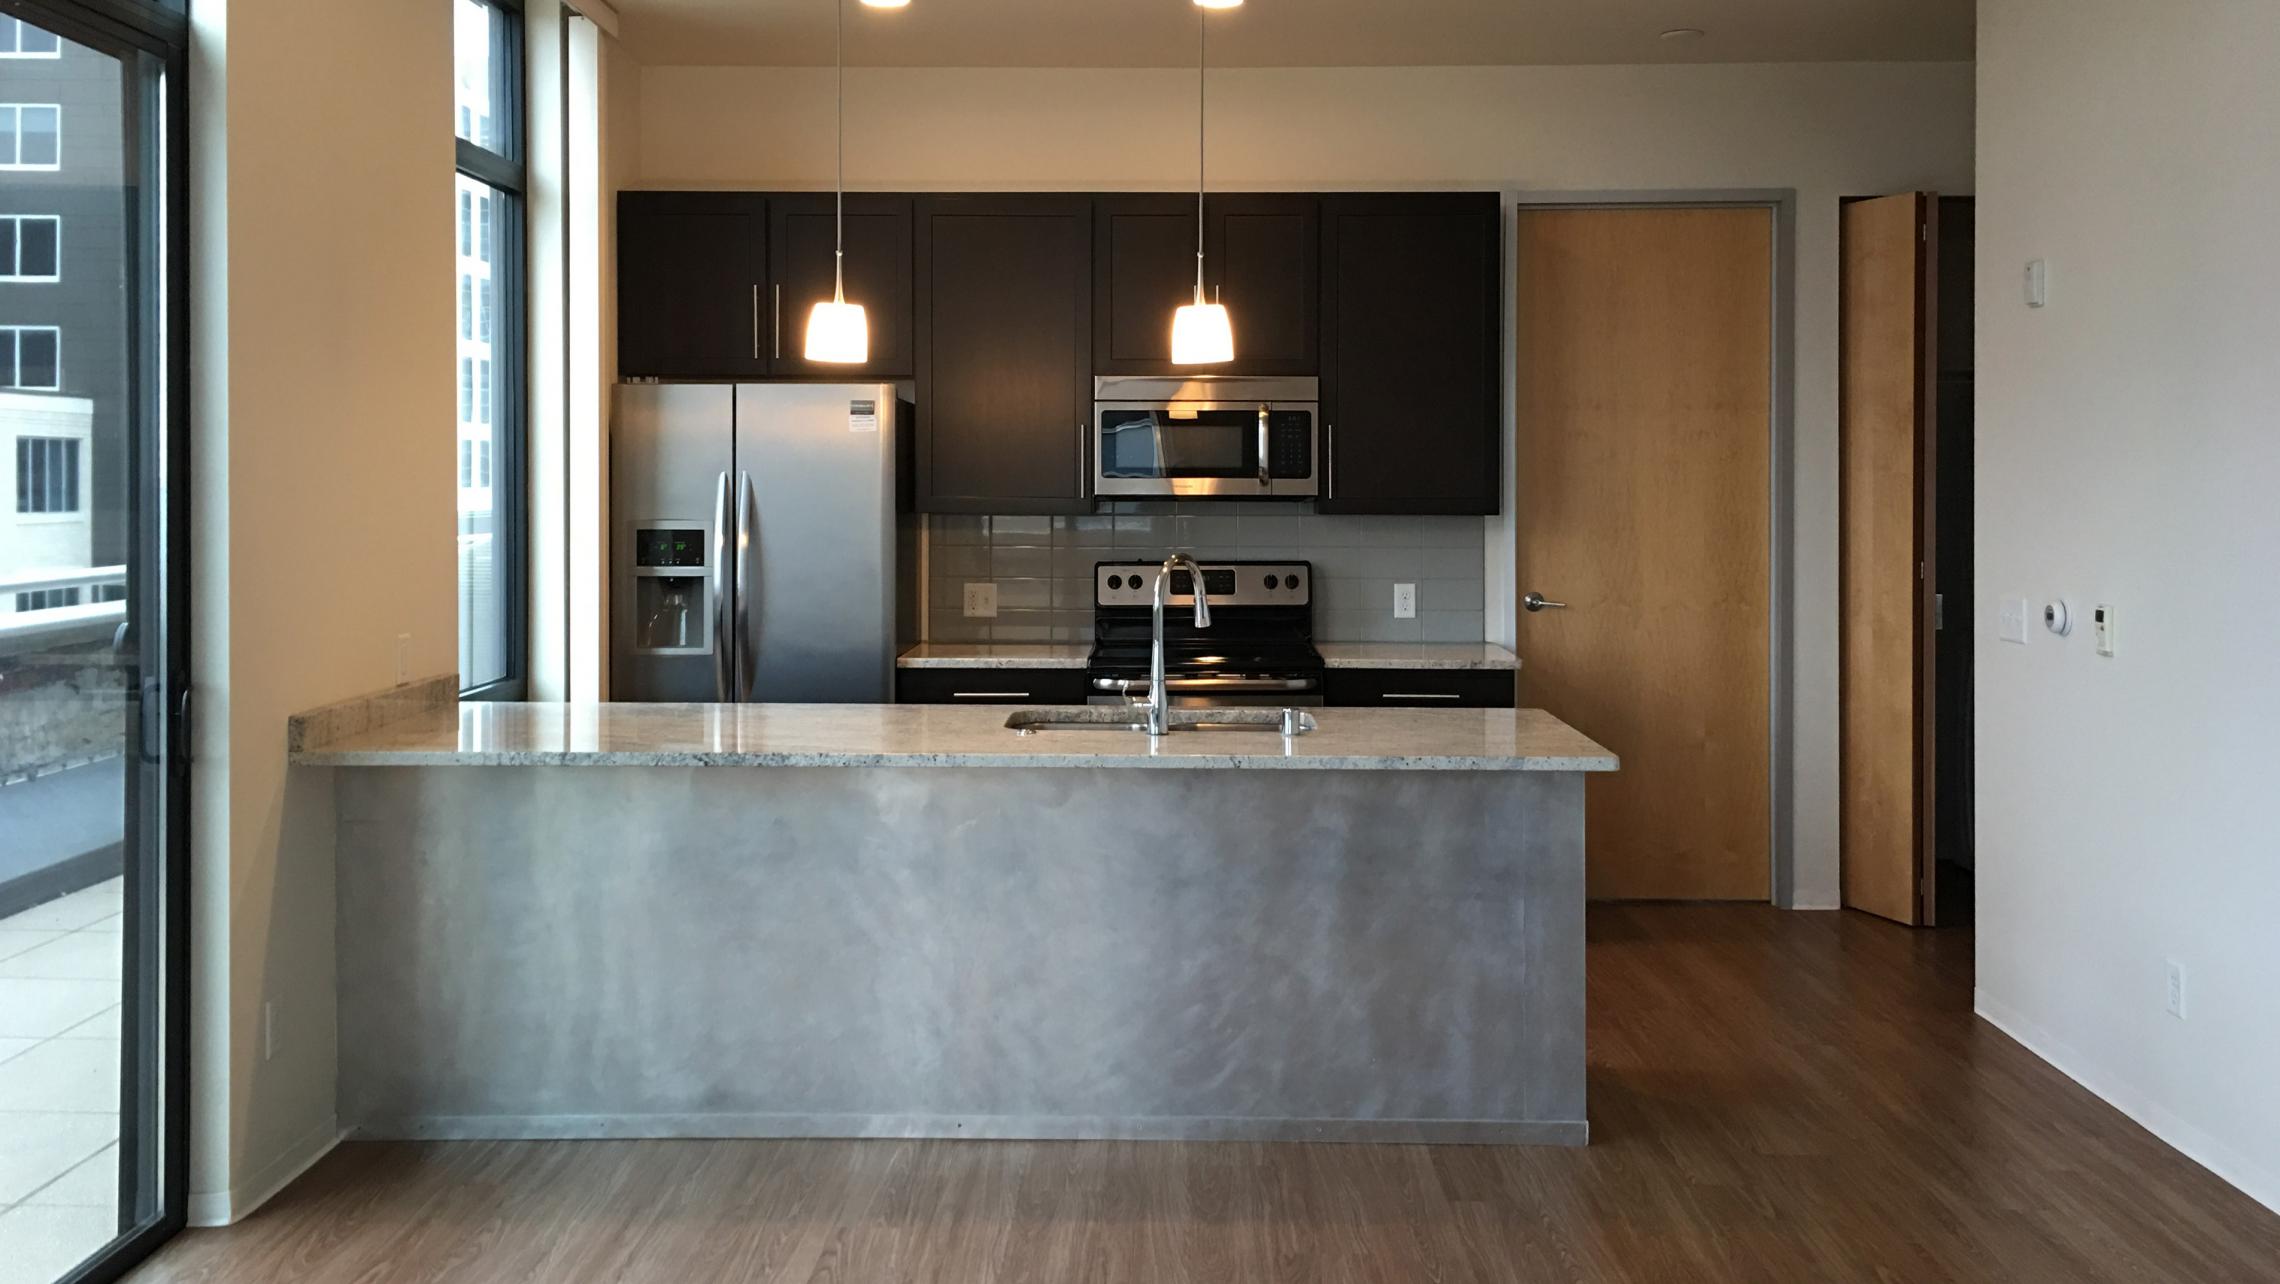 ULI Capitol Hill - Kitchen with High End Finishes